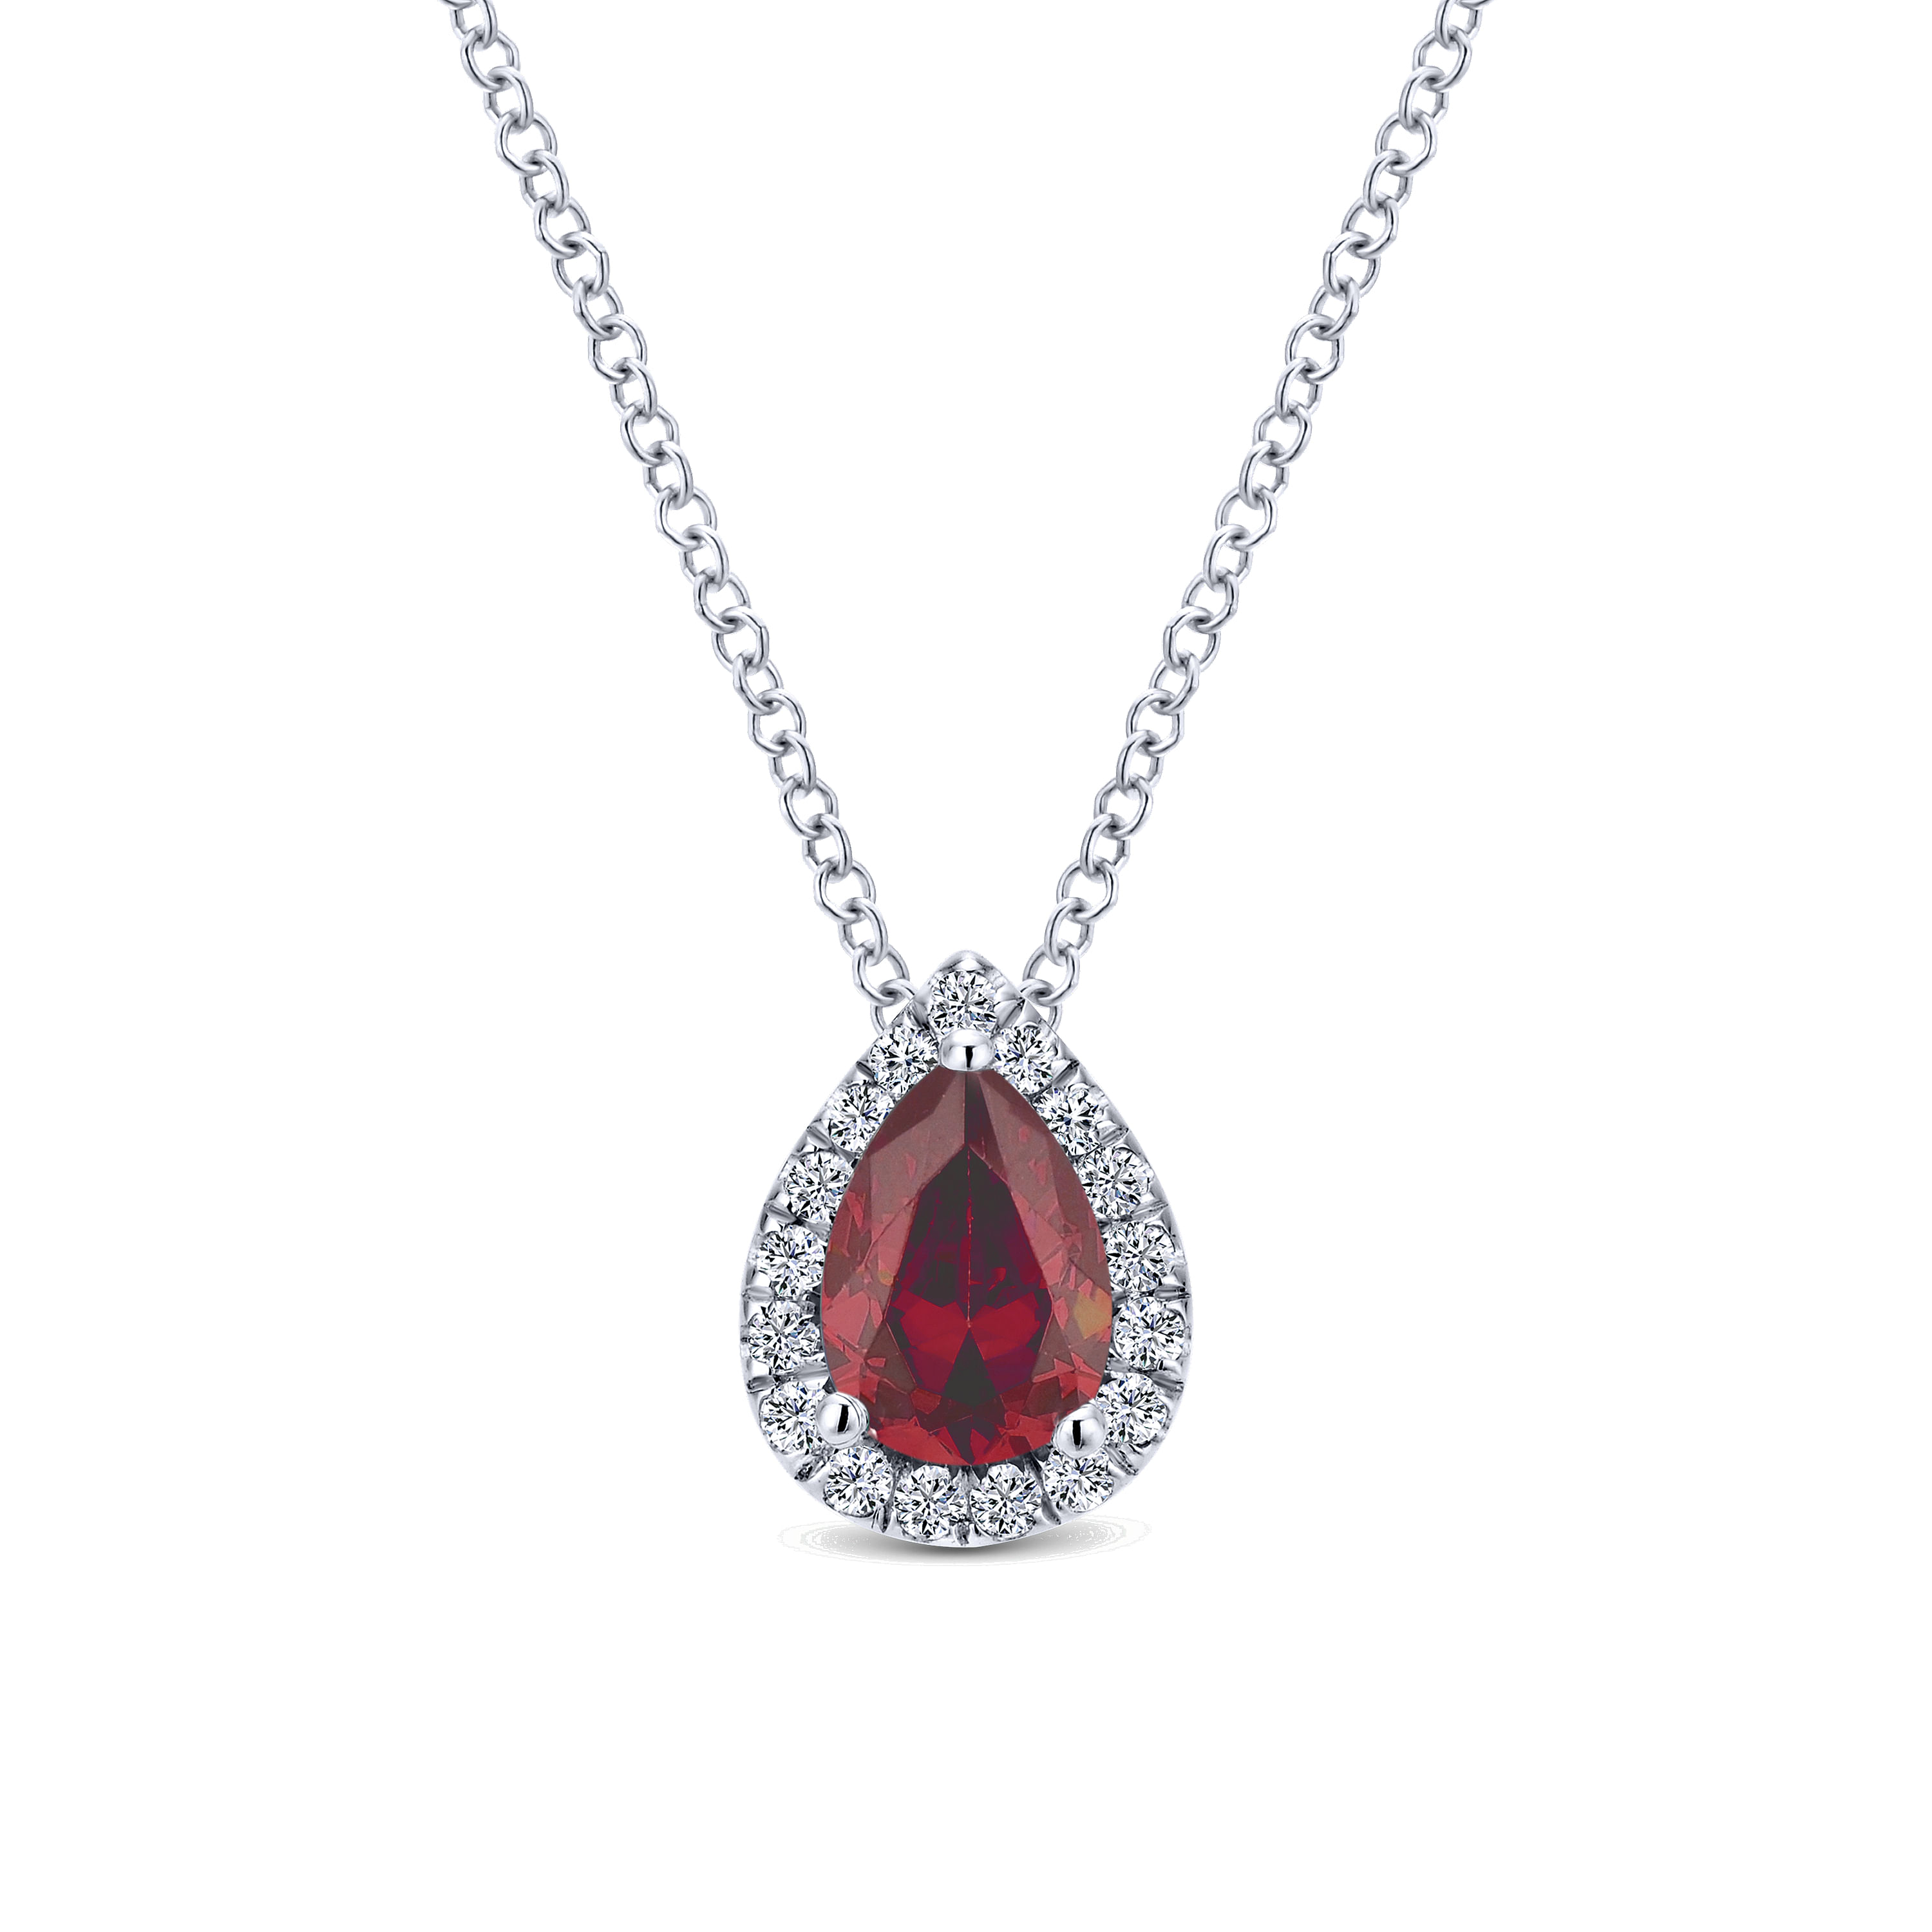 18-inch-14K-White-Gold-Pear-Shaped-Ruby-and-Diamond-Halo-Pendant-Necklace1